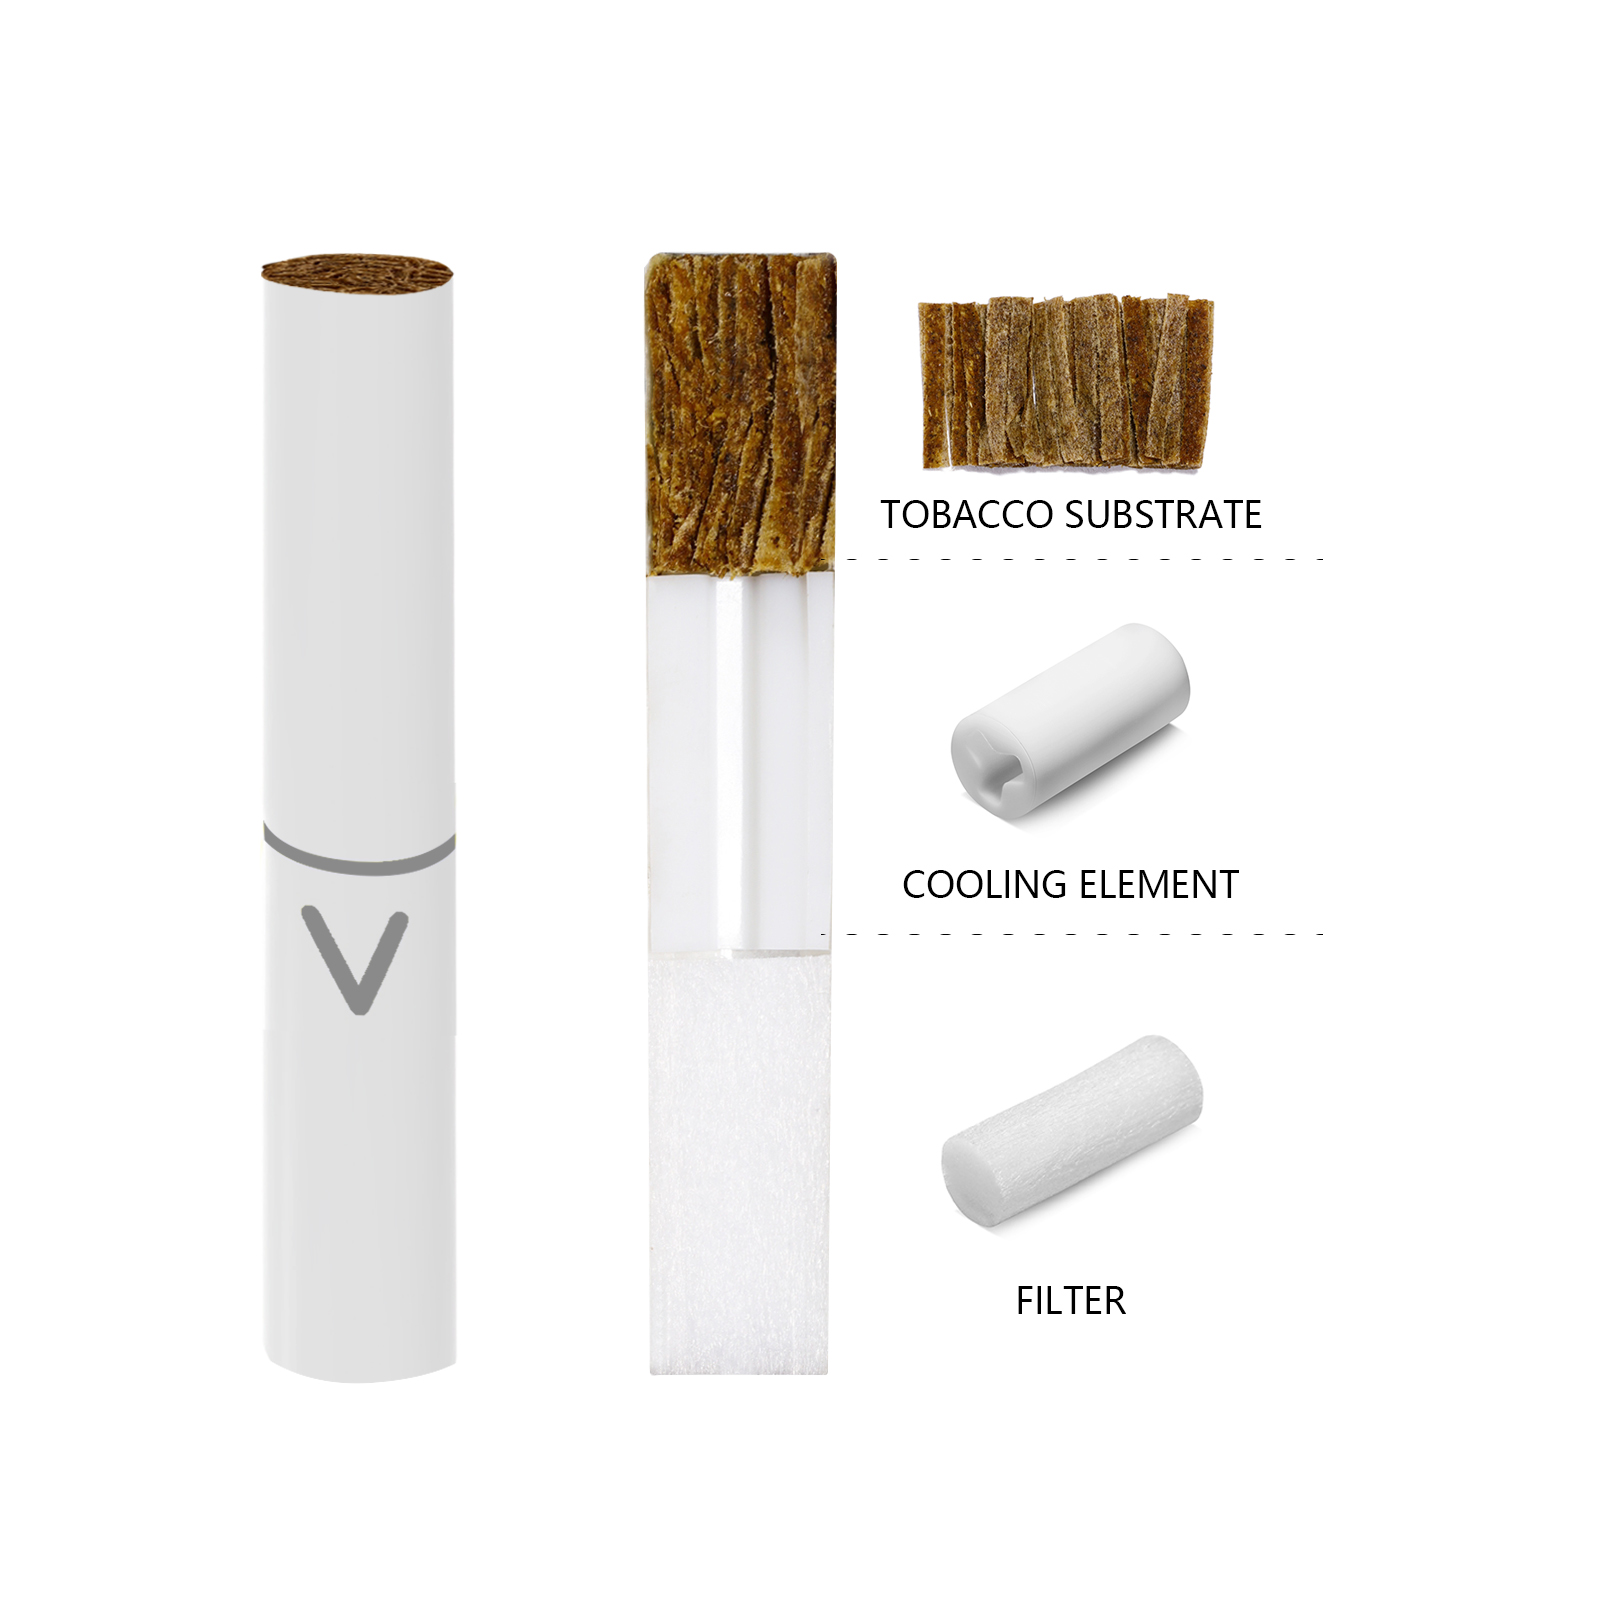 Tobacco Heat Not Burn Stick for Cigarett E Heating Heat Not Burn Device with Yellow Natural Flavor